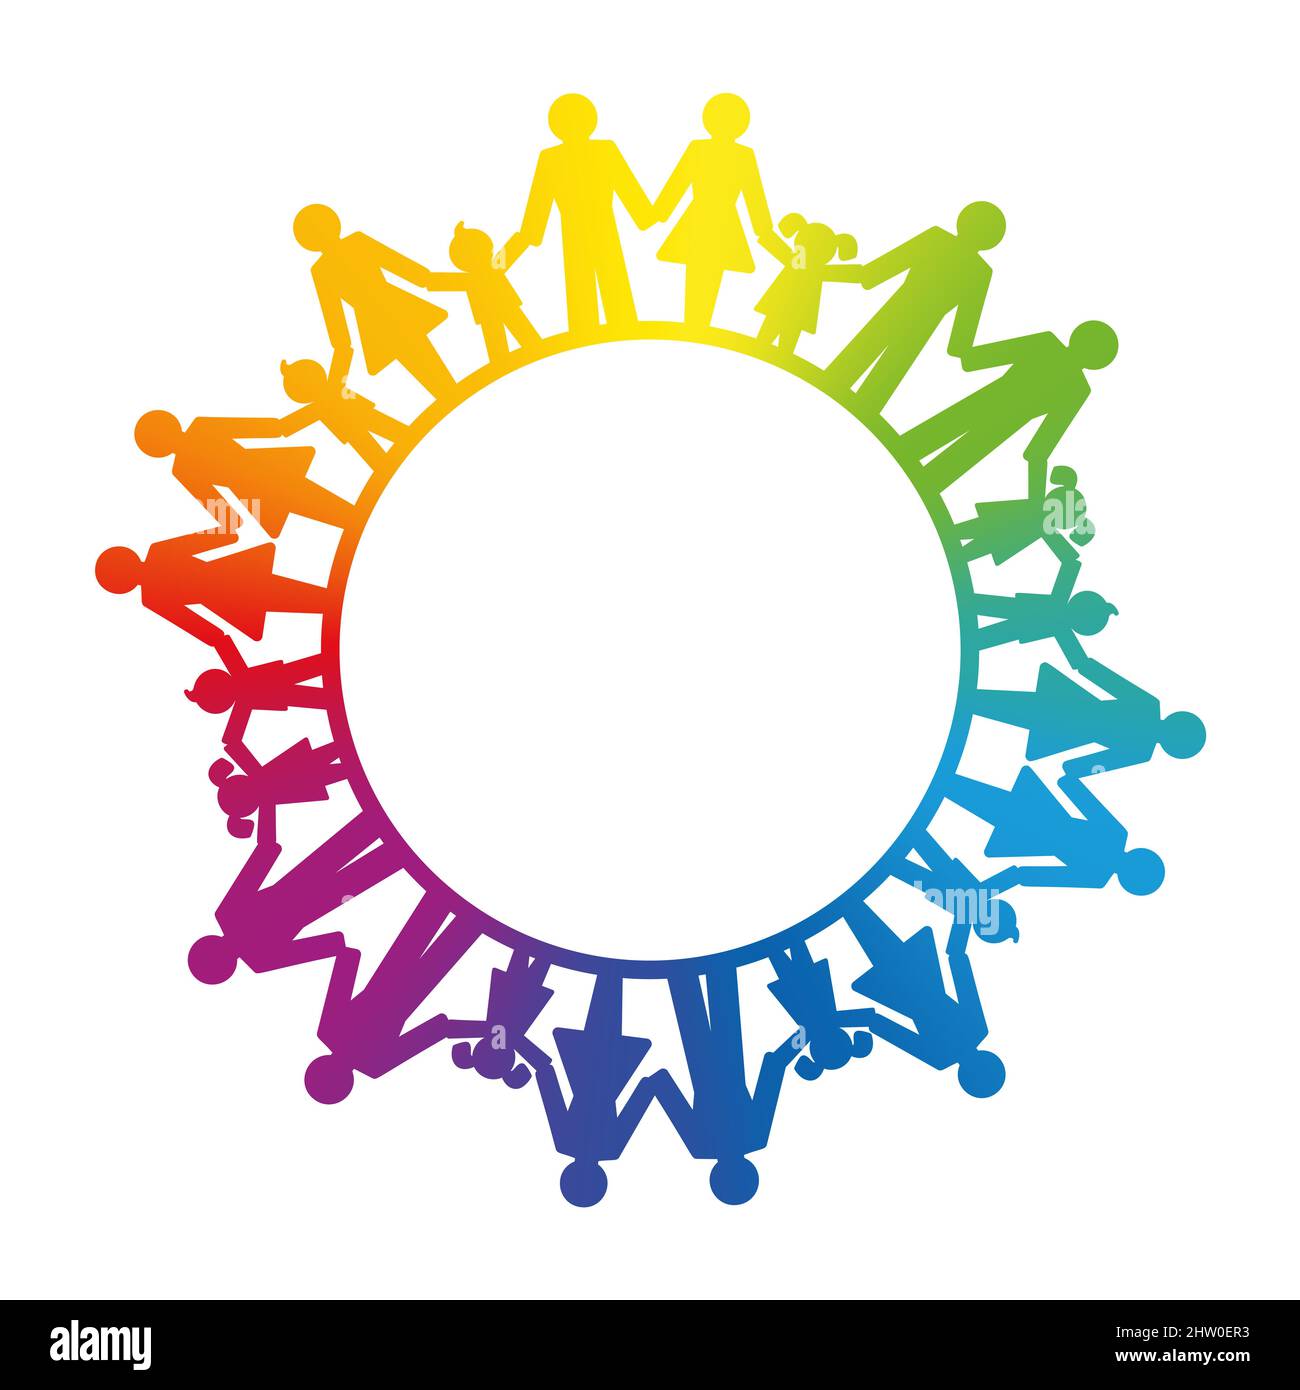 Group of people, connected by holding hands, forming a rainbow colored circle. Symbol of solidarity of people, expressing a peaceful society. Stock Photo